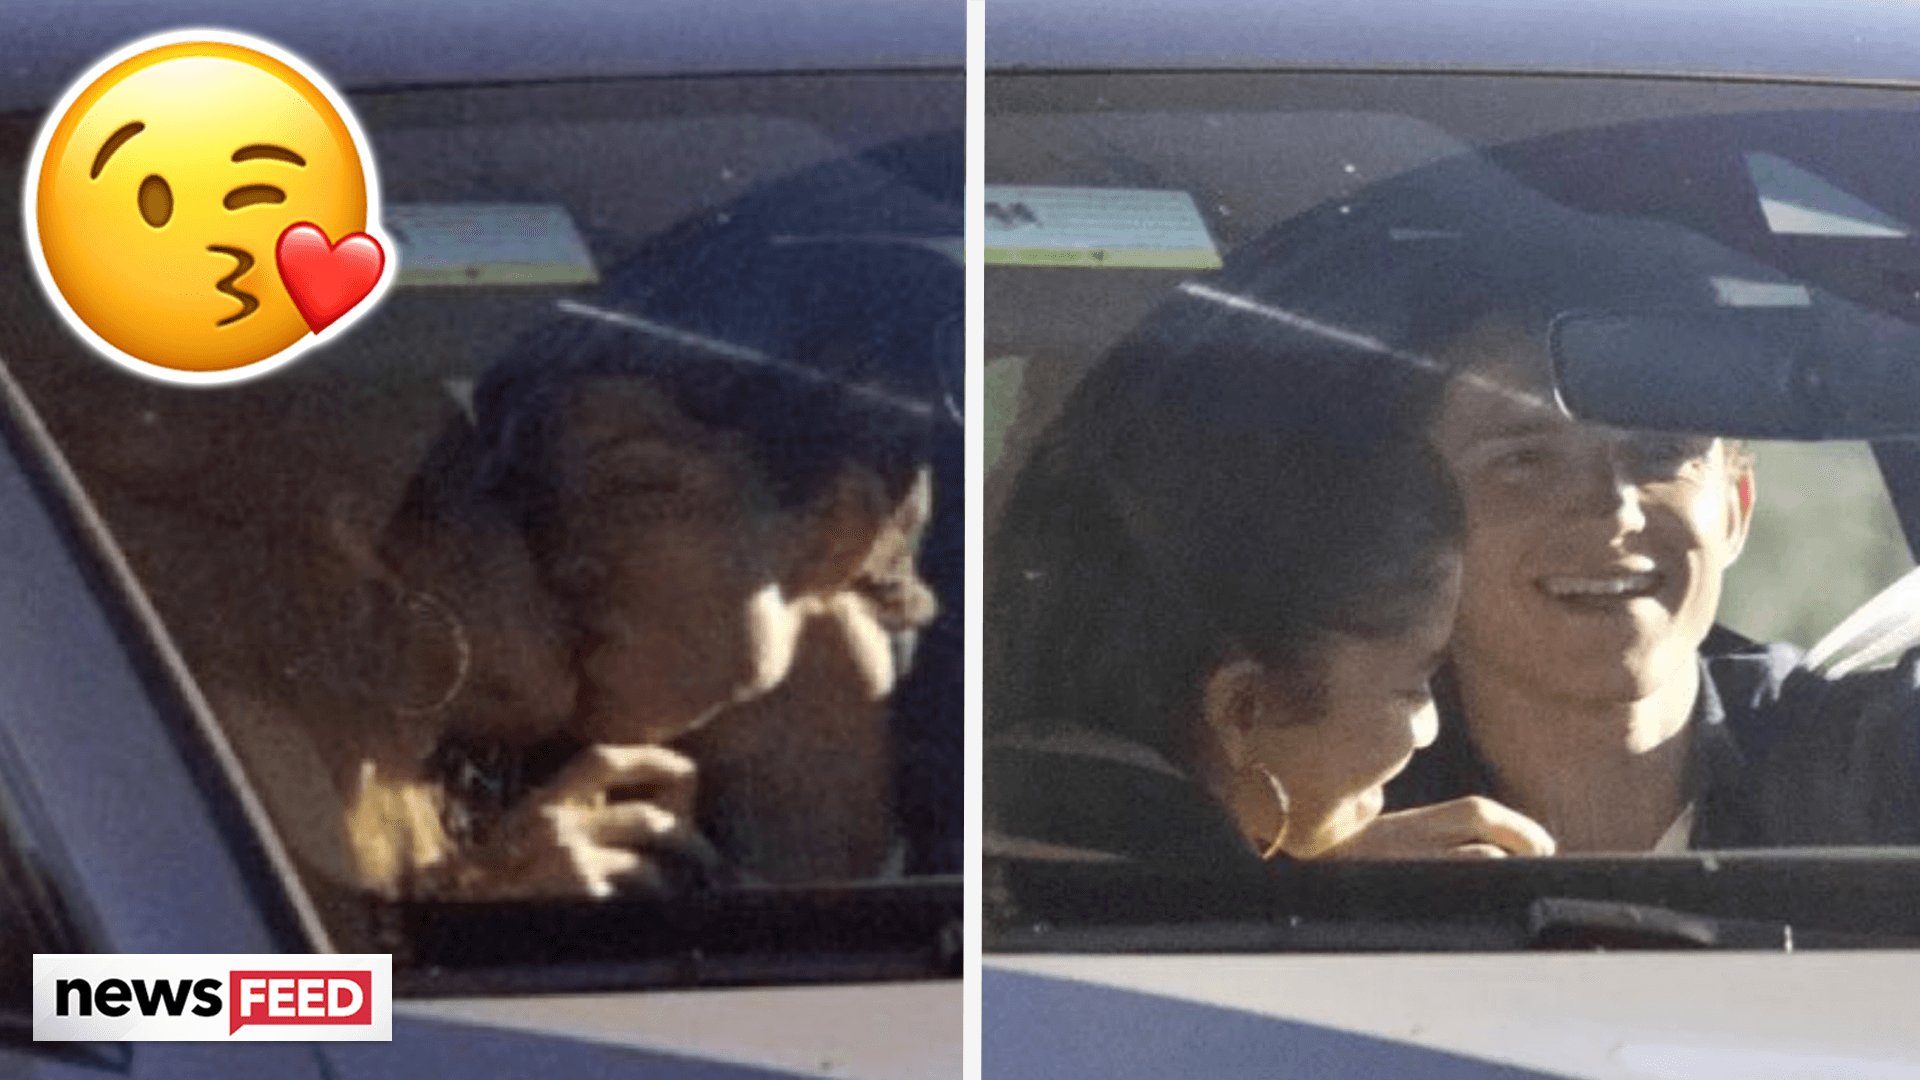 Zendaya and Tom Holland Spotted Making Out in a Car